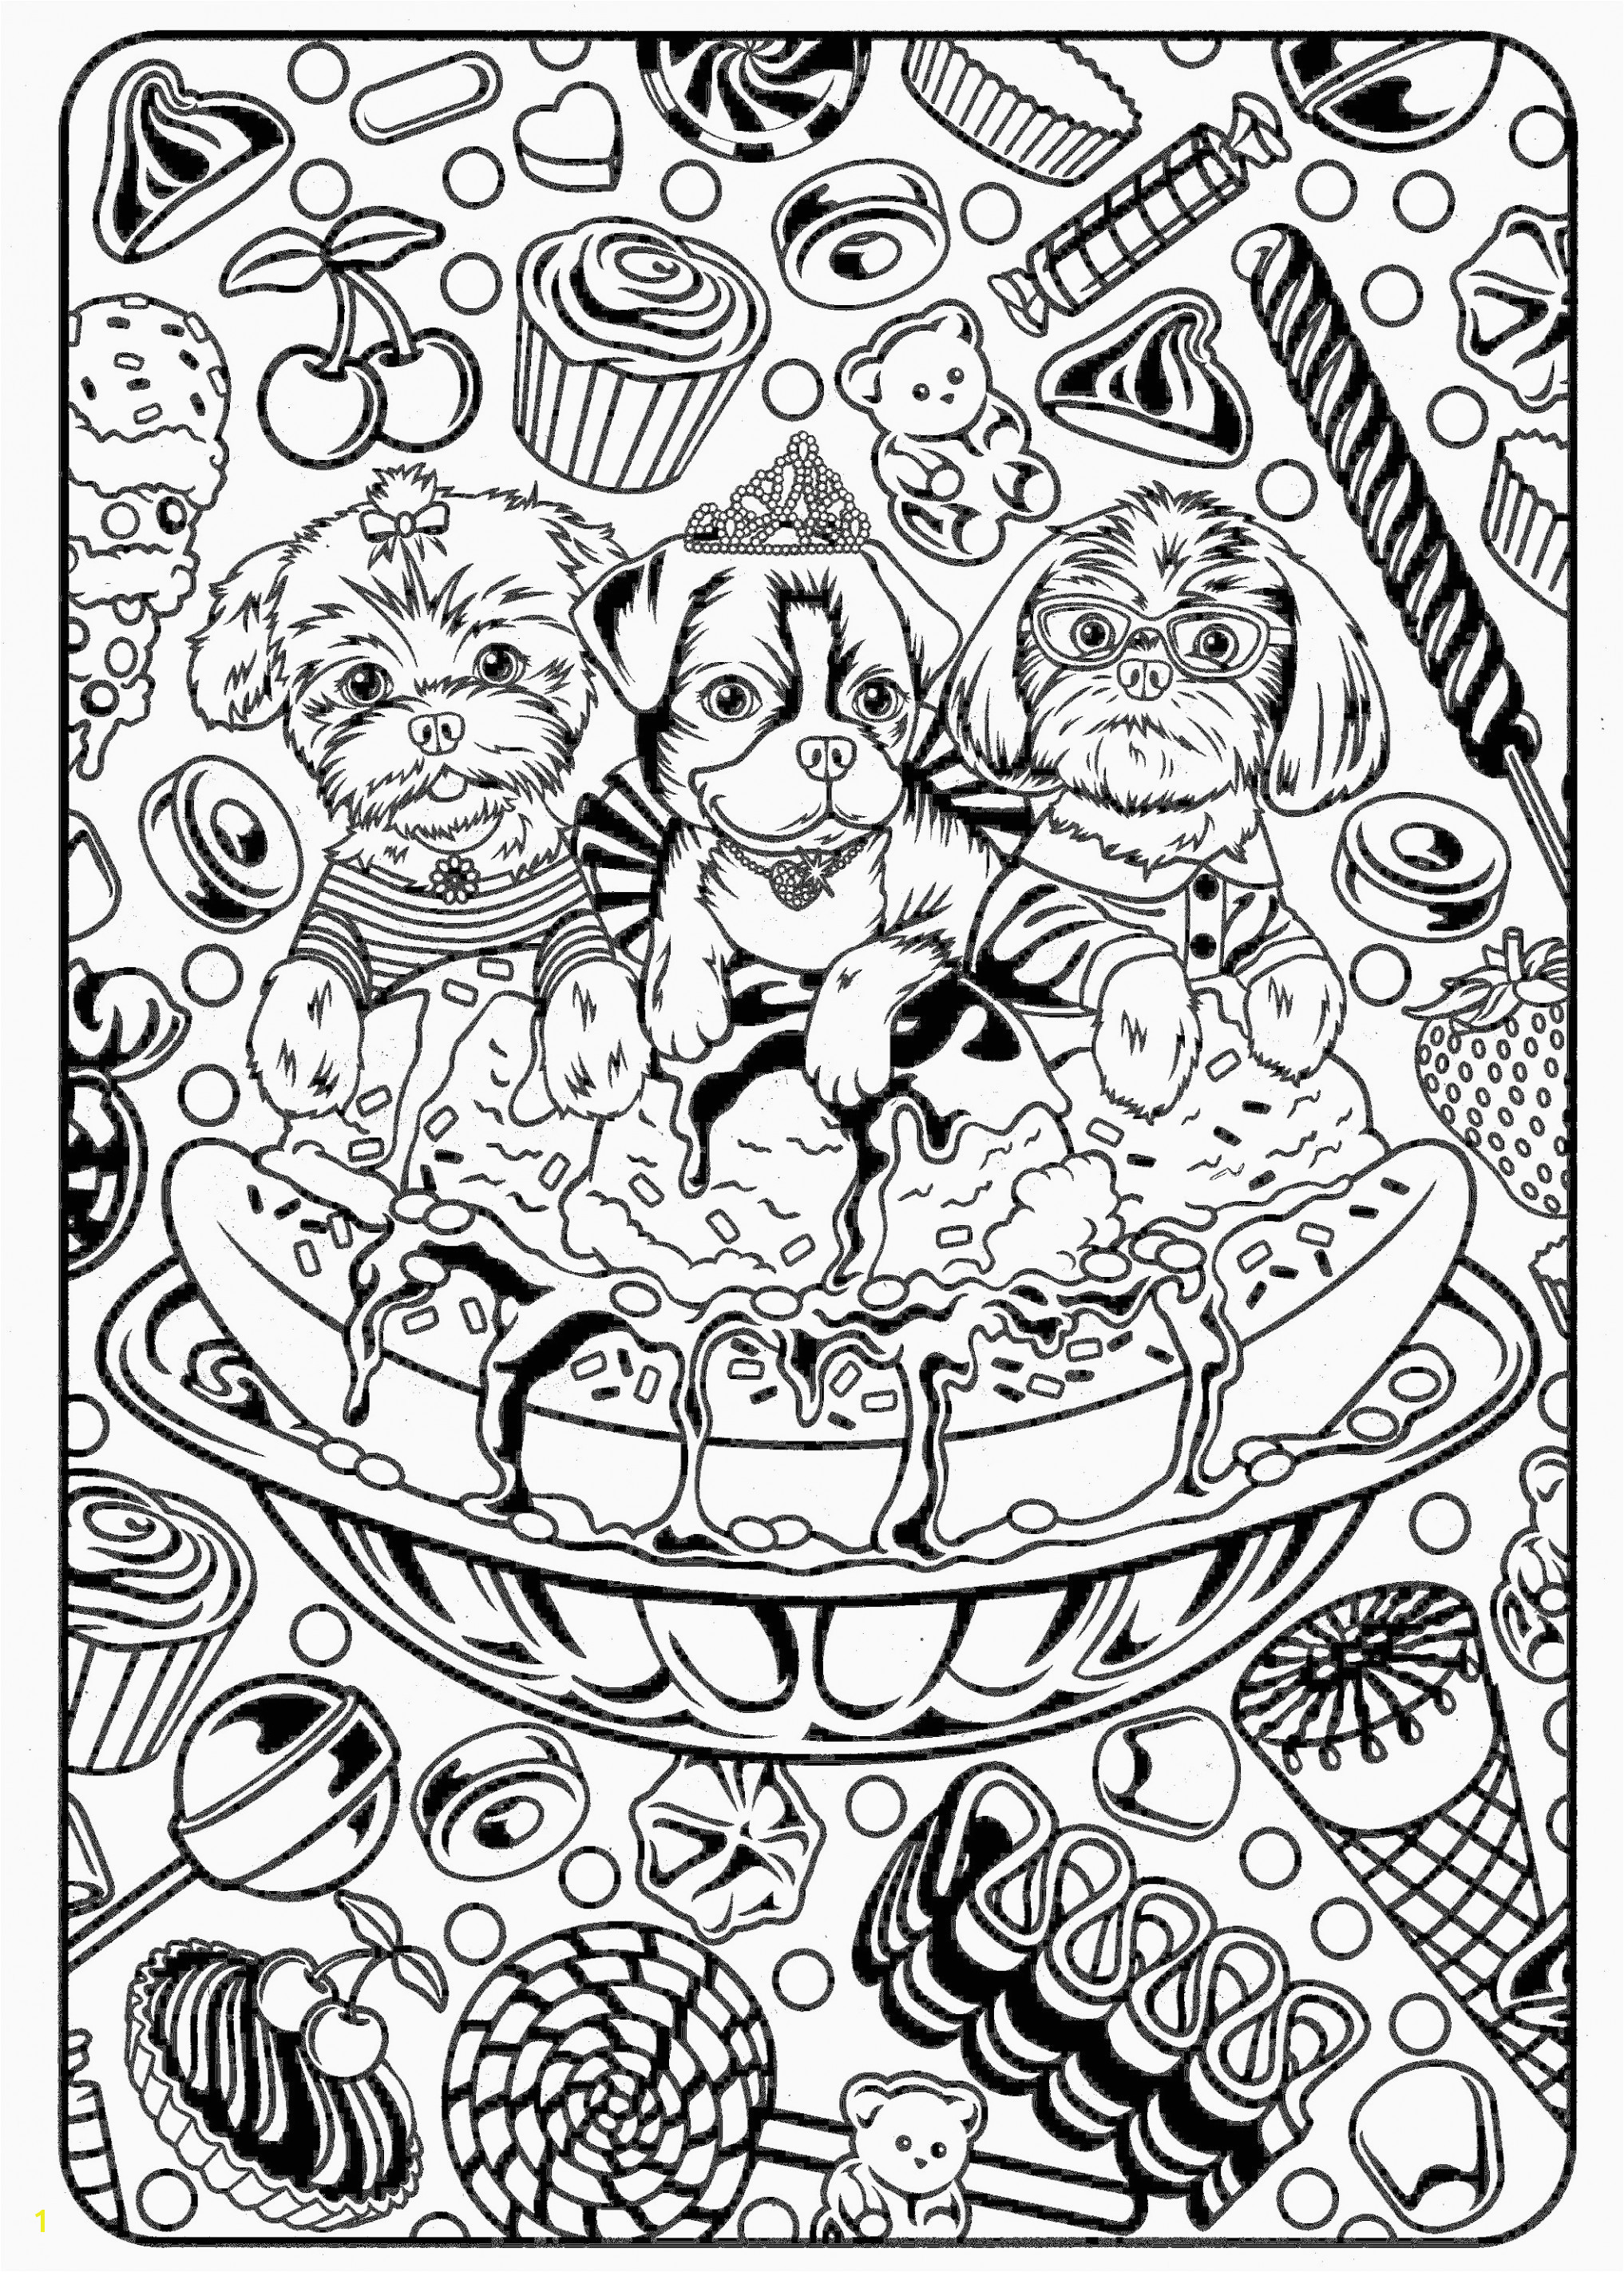 Disney Halloween Coloring Sheets Printable Home Coloring Pages Best Color Sheet 0d – Modokom – Fun